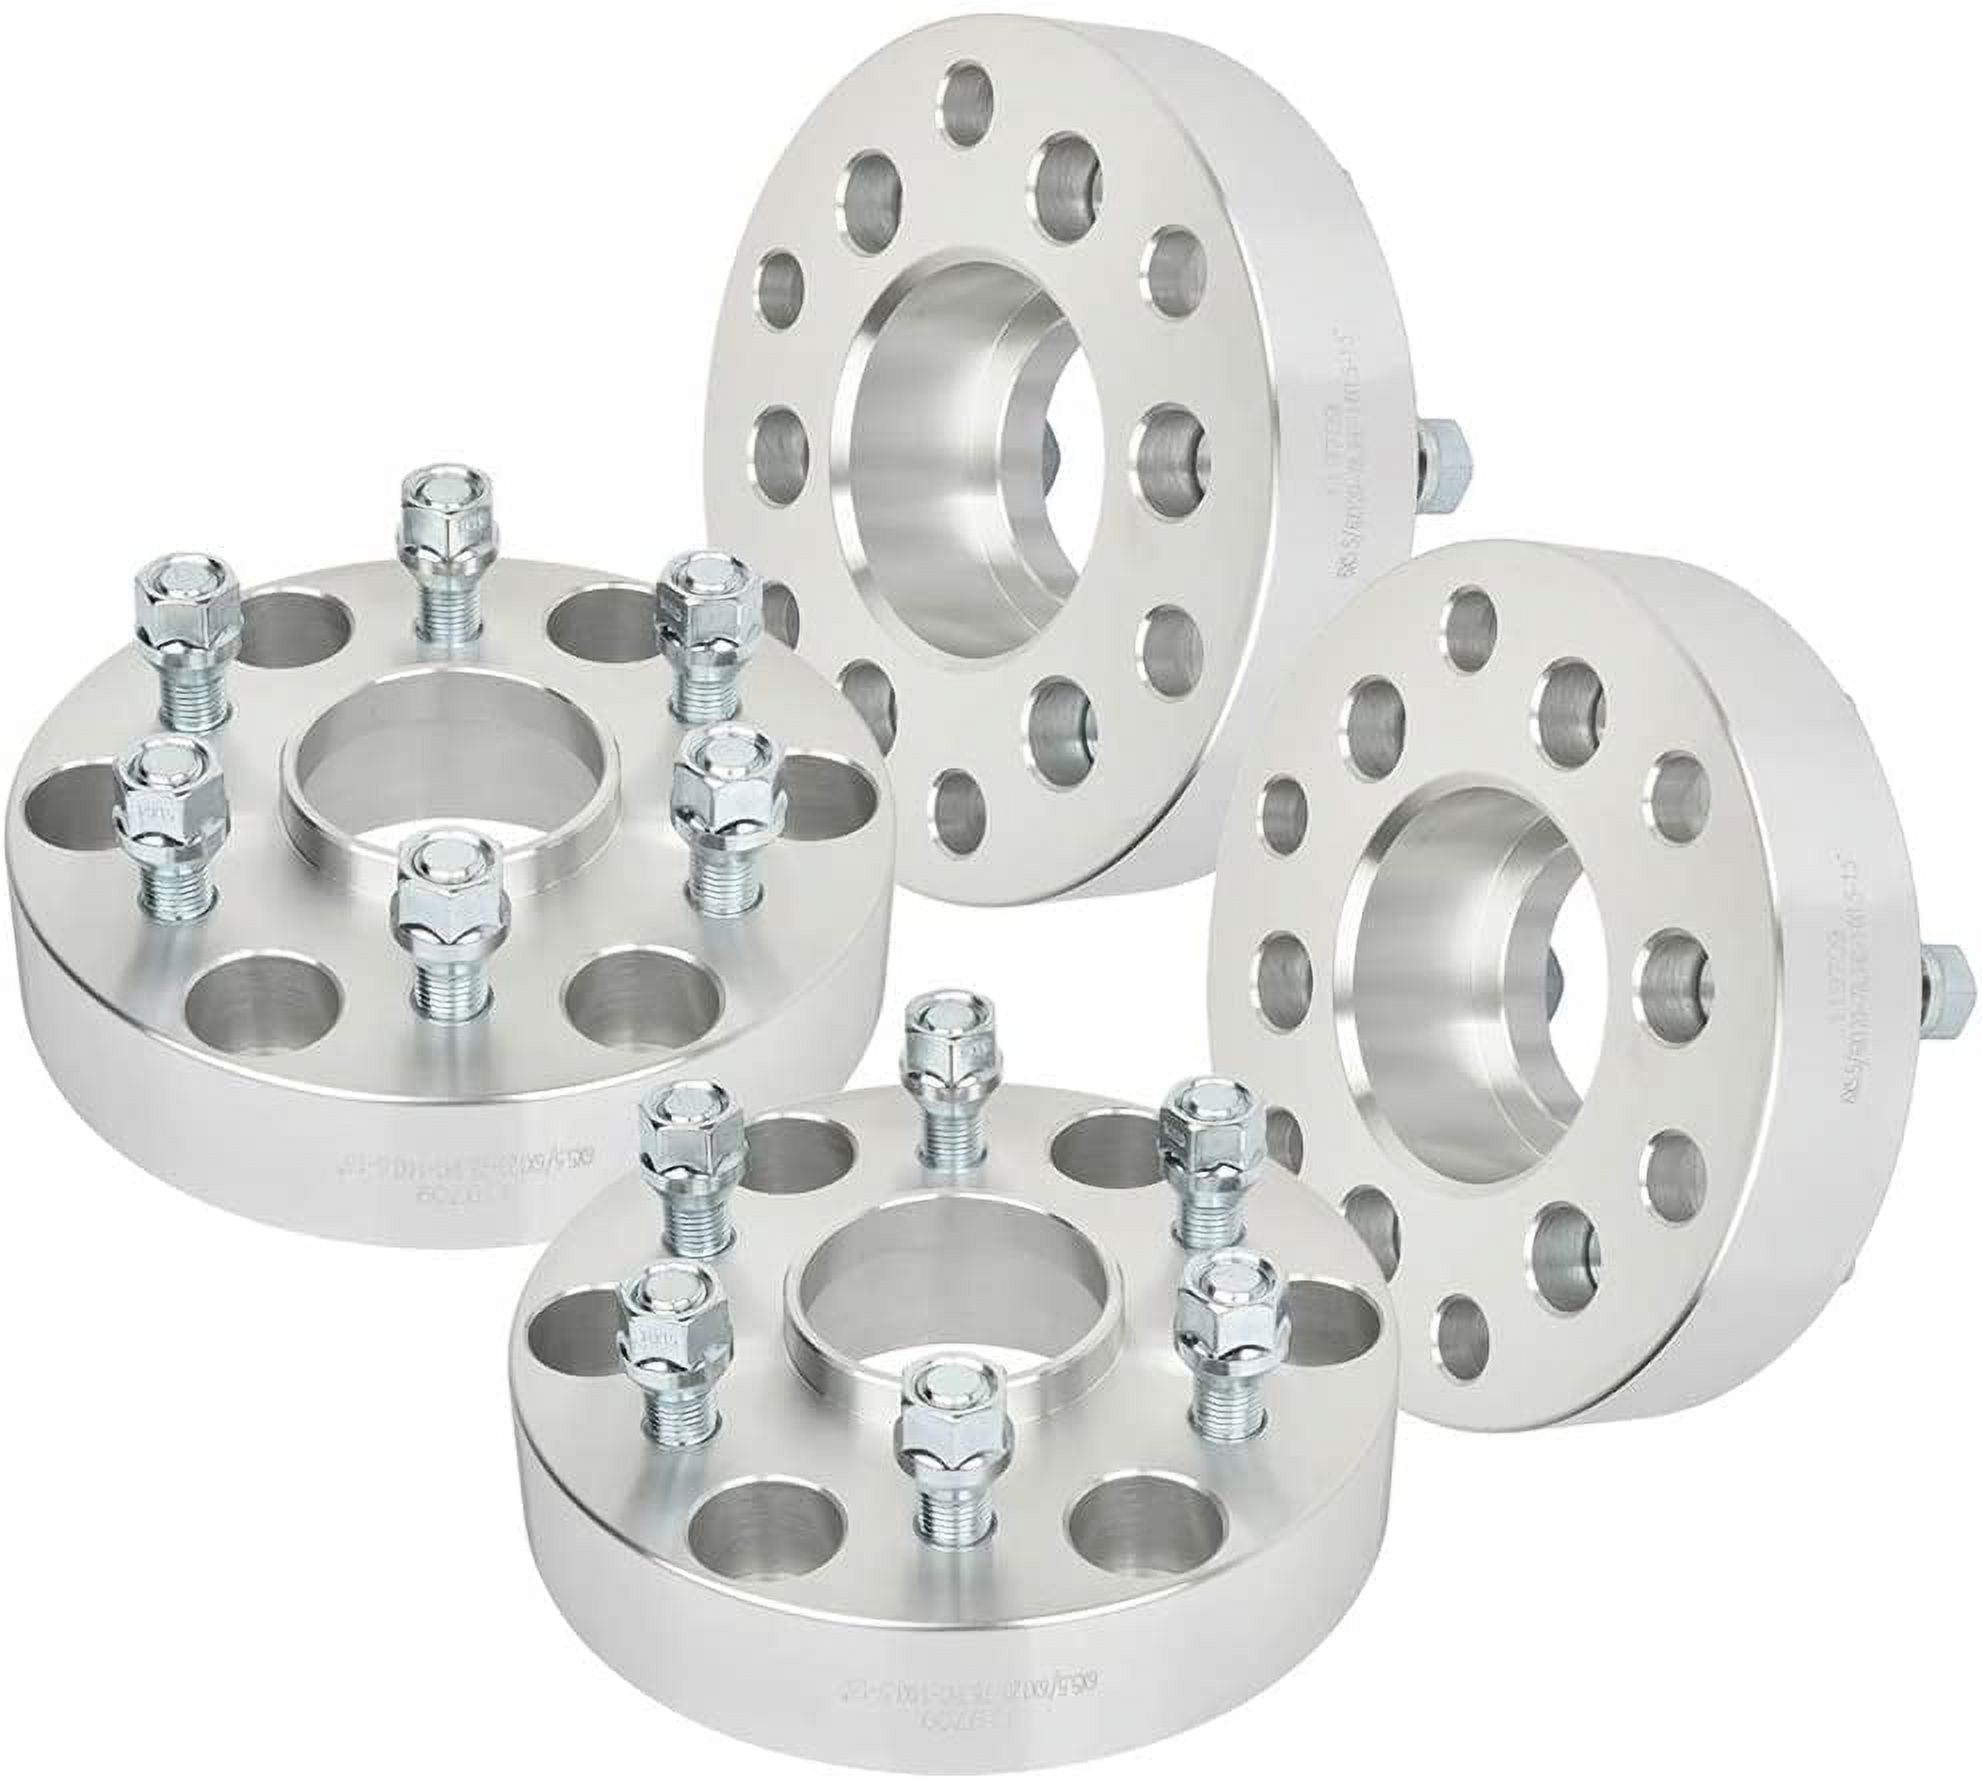 ECCPP Pair of 8 Lug Wheel Spacers Adapters 1.5 8x6.5 to 8x6.5 8x165.1 to  8x165.1 126.15mm fit for F250 F350 for Ram 2500 3500 with 9/16 Stud